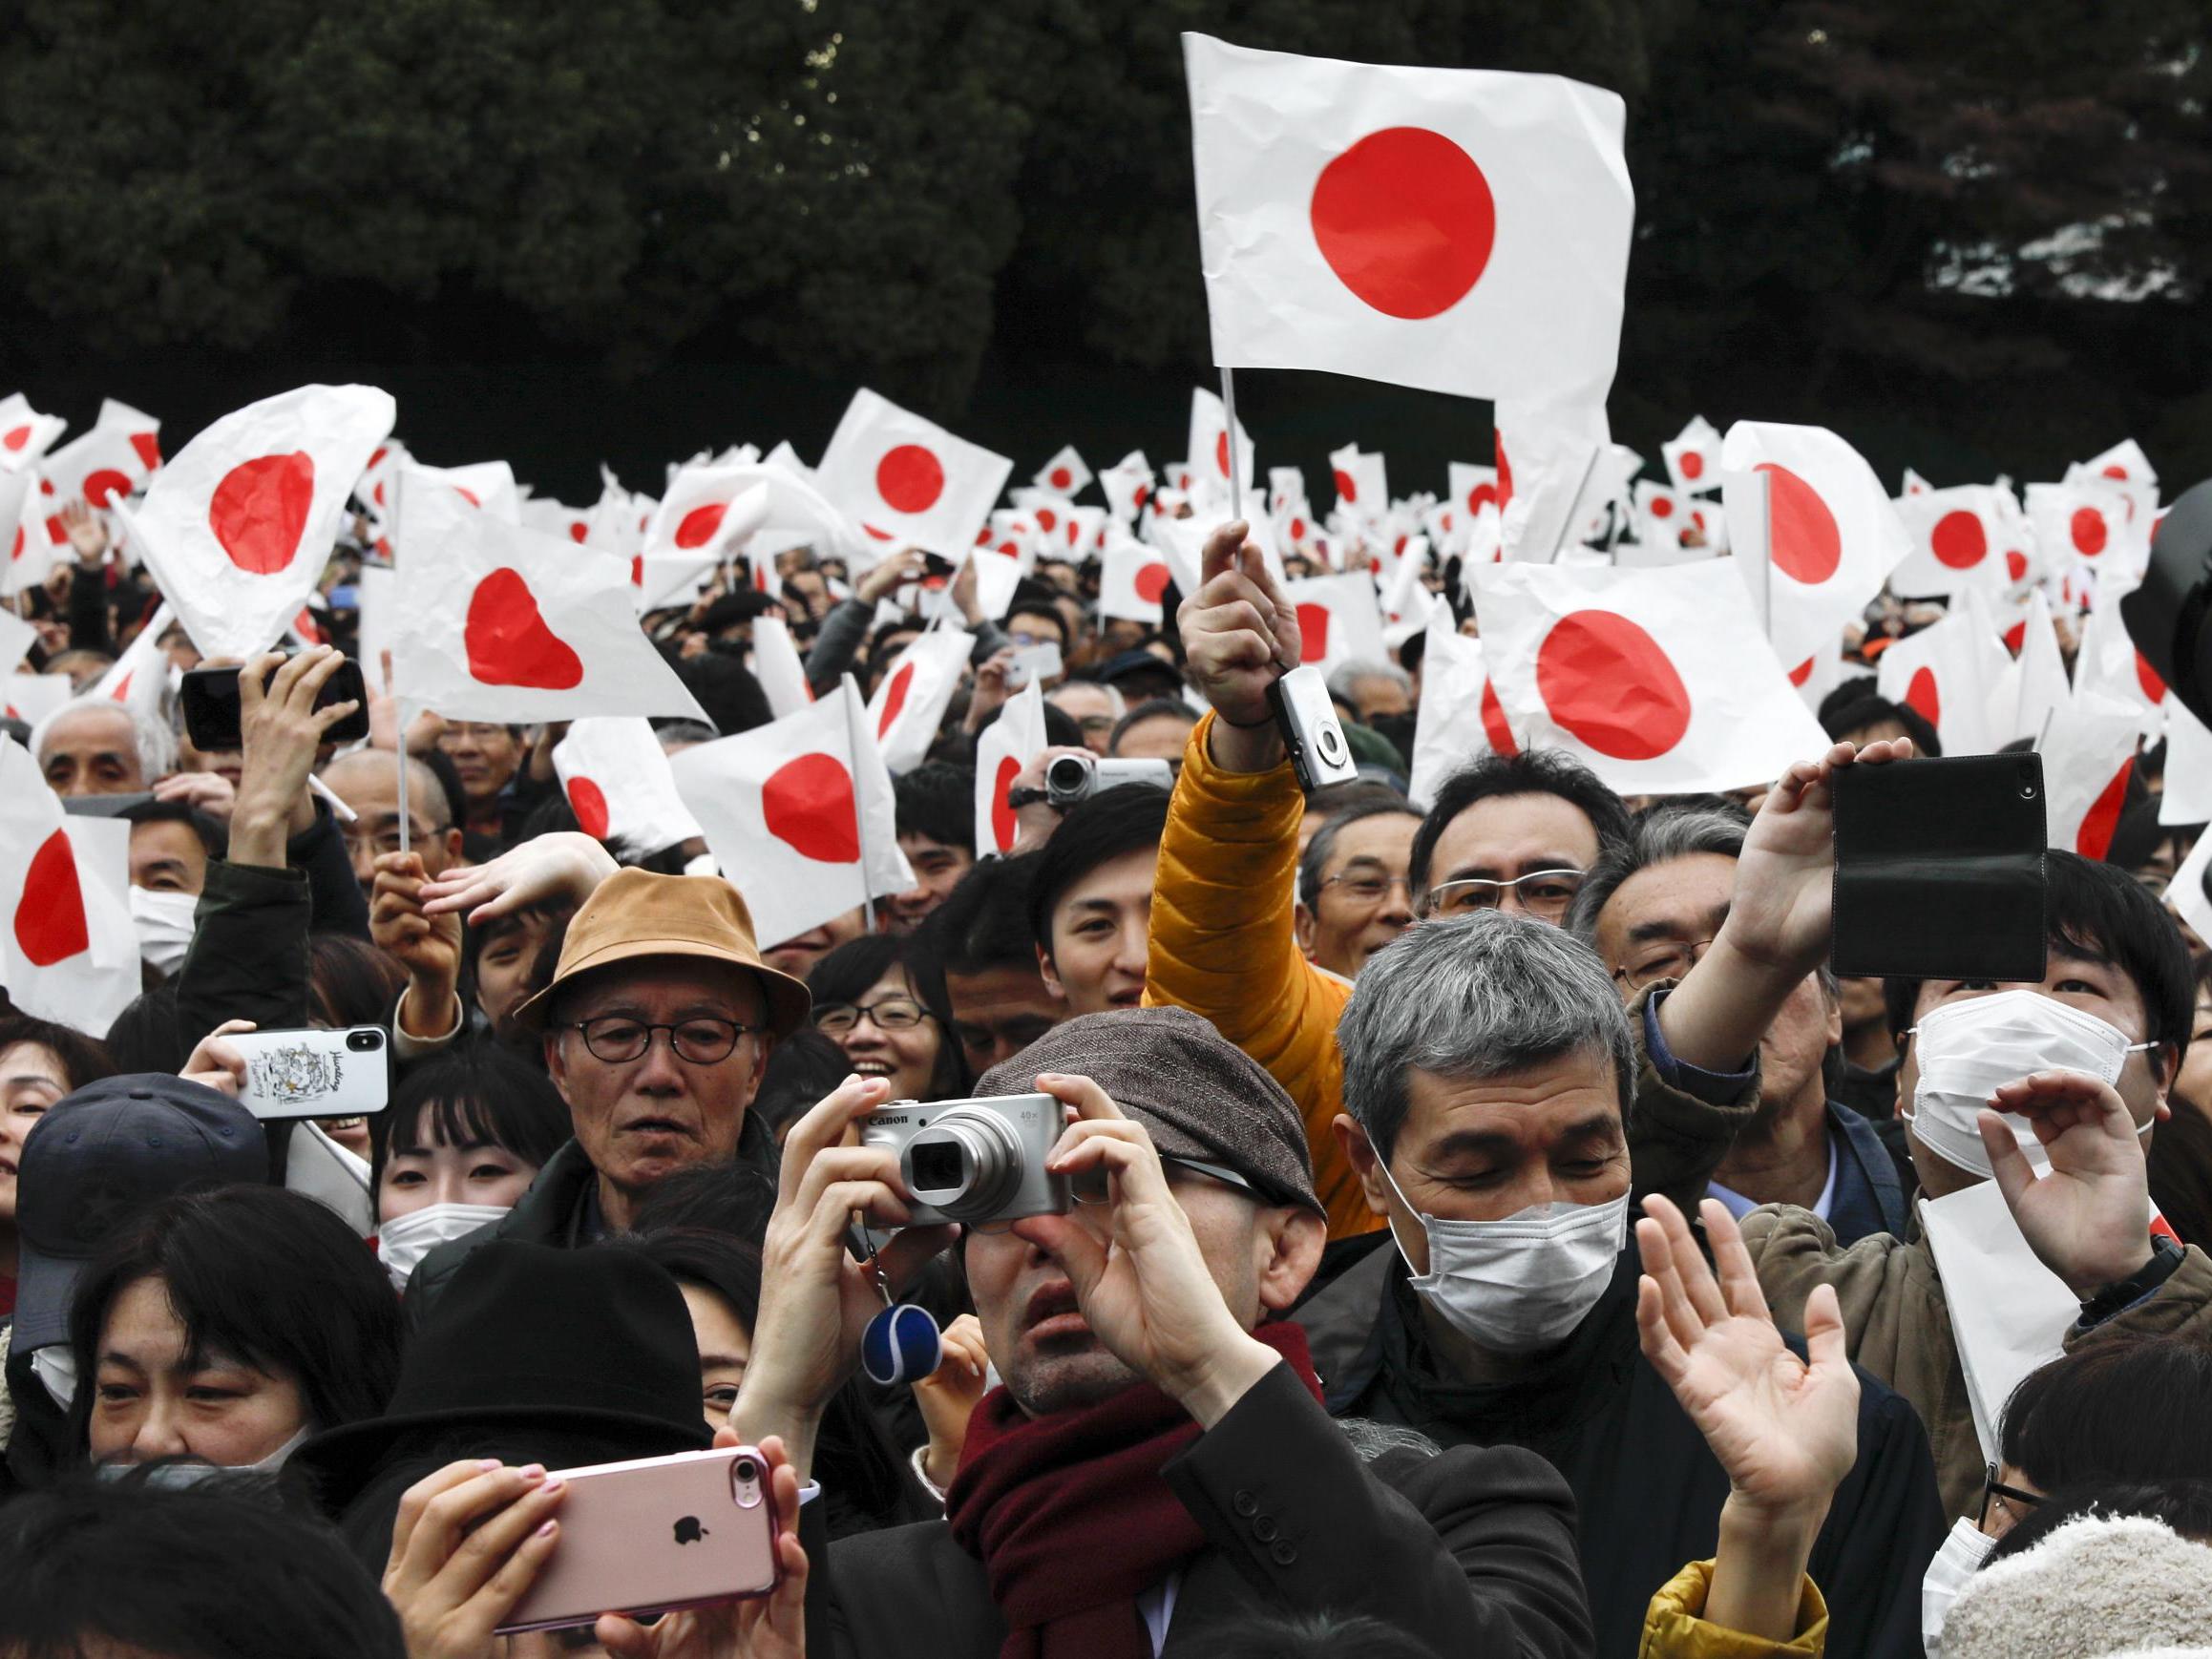 More than 82,000 people gathered at the Imperial Palace in Tokyo